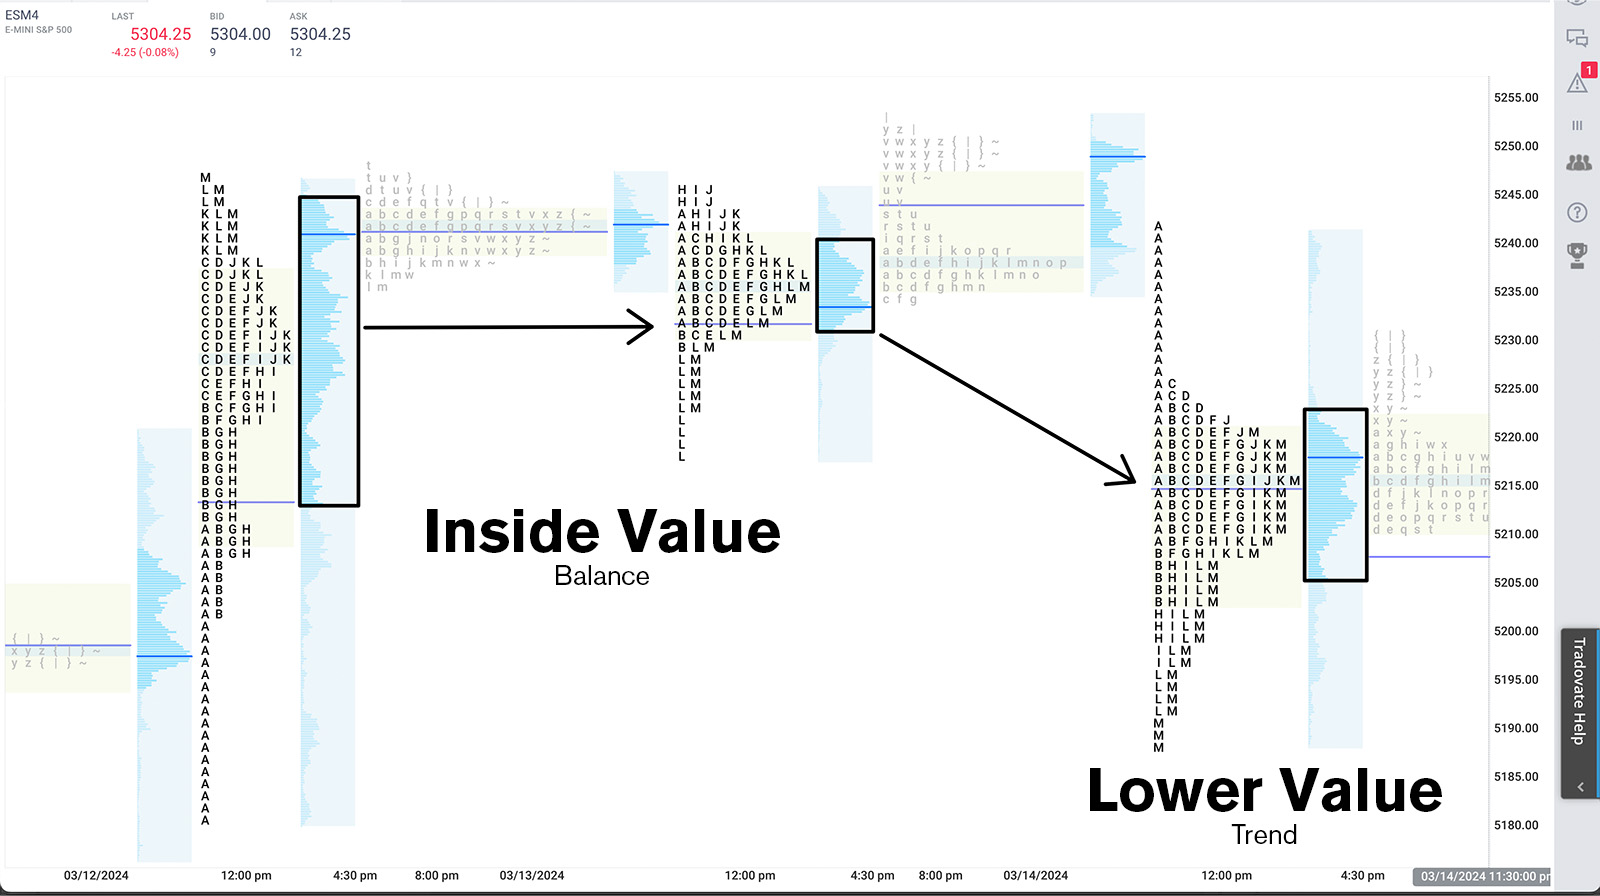 inside value and trend lower value